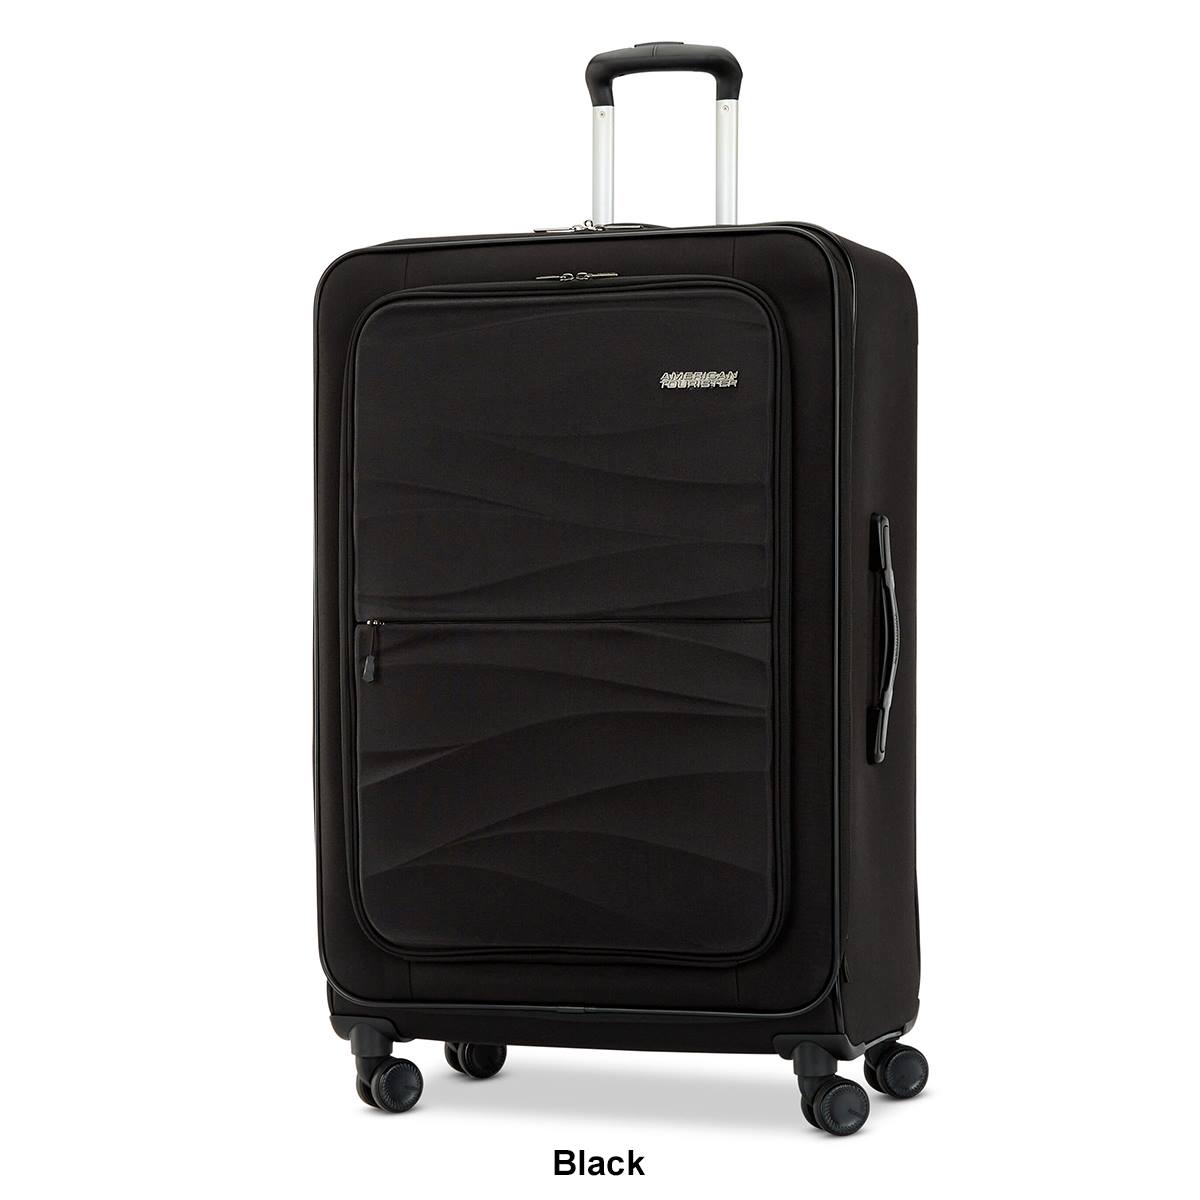 American Tourister(R) Cascade 28in. Spinner Luggage